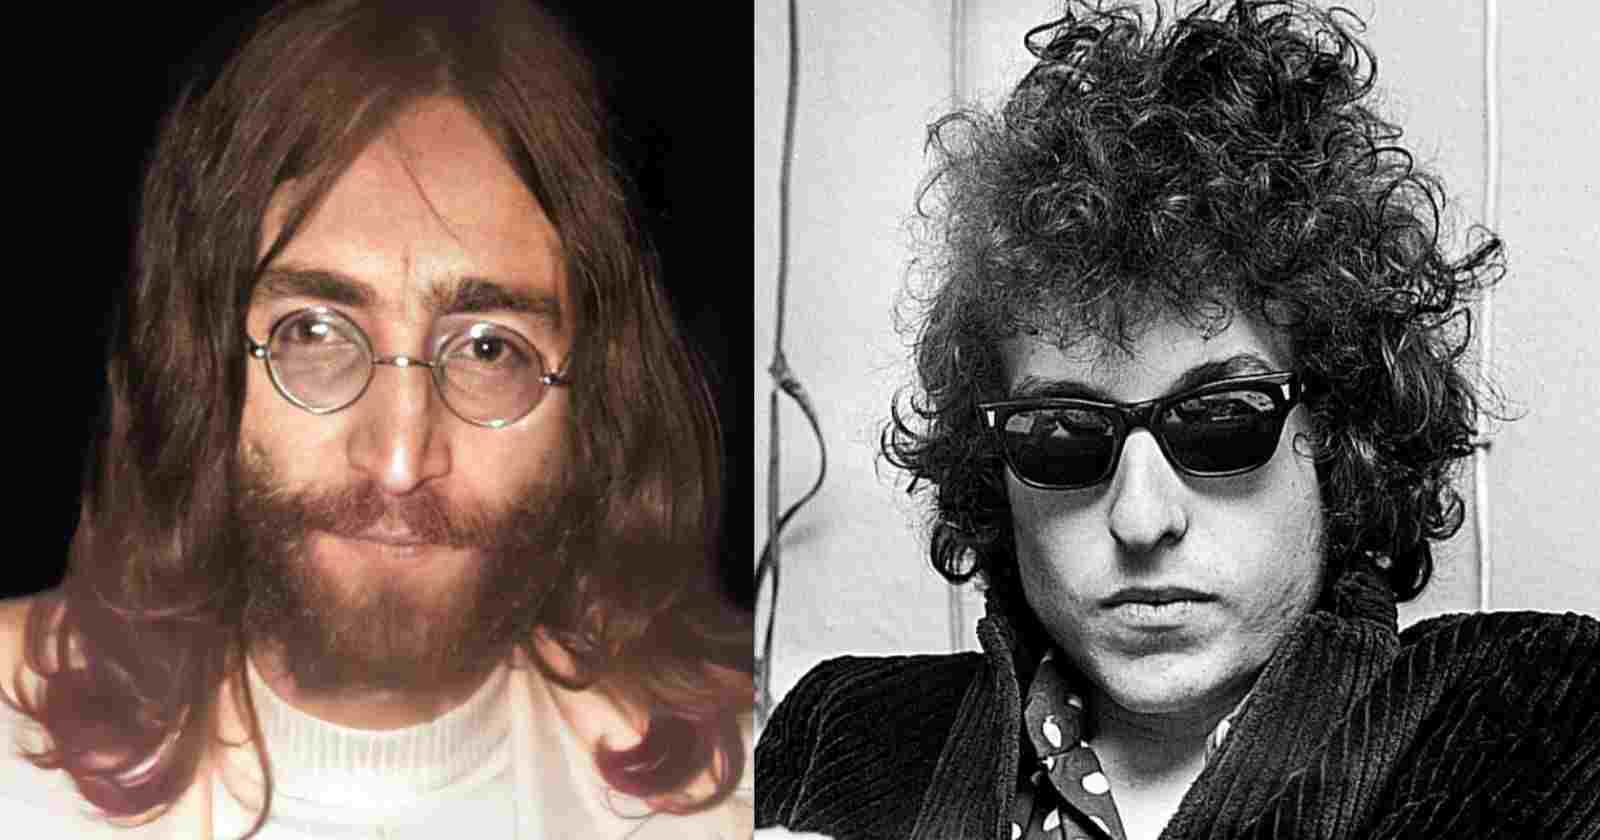 When John Lennon talked about Bob Dylan and other musicians he liked